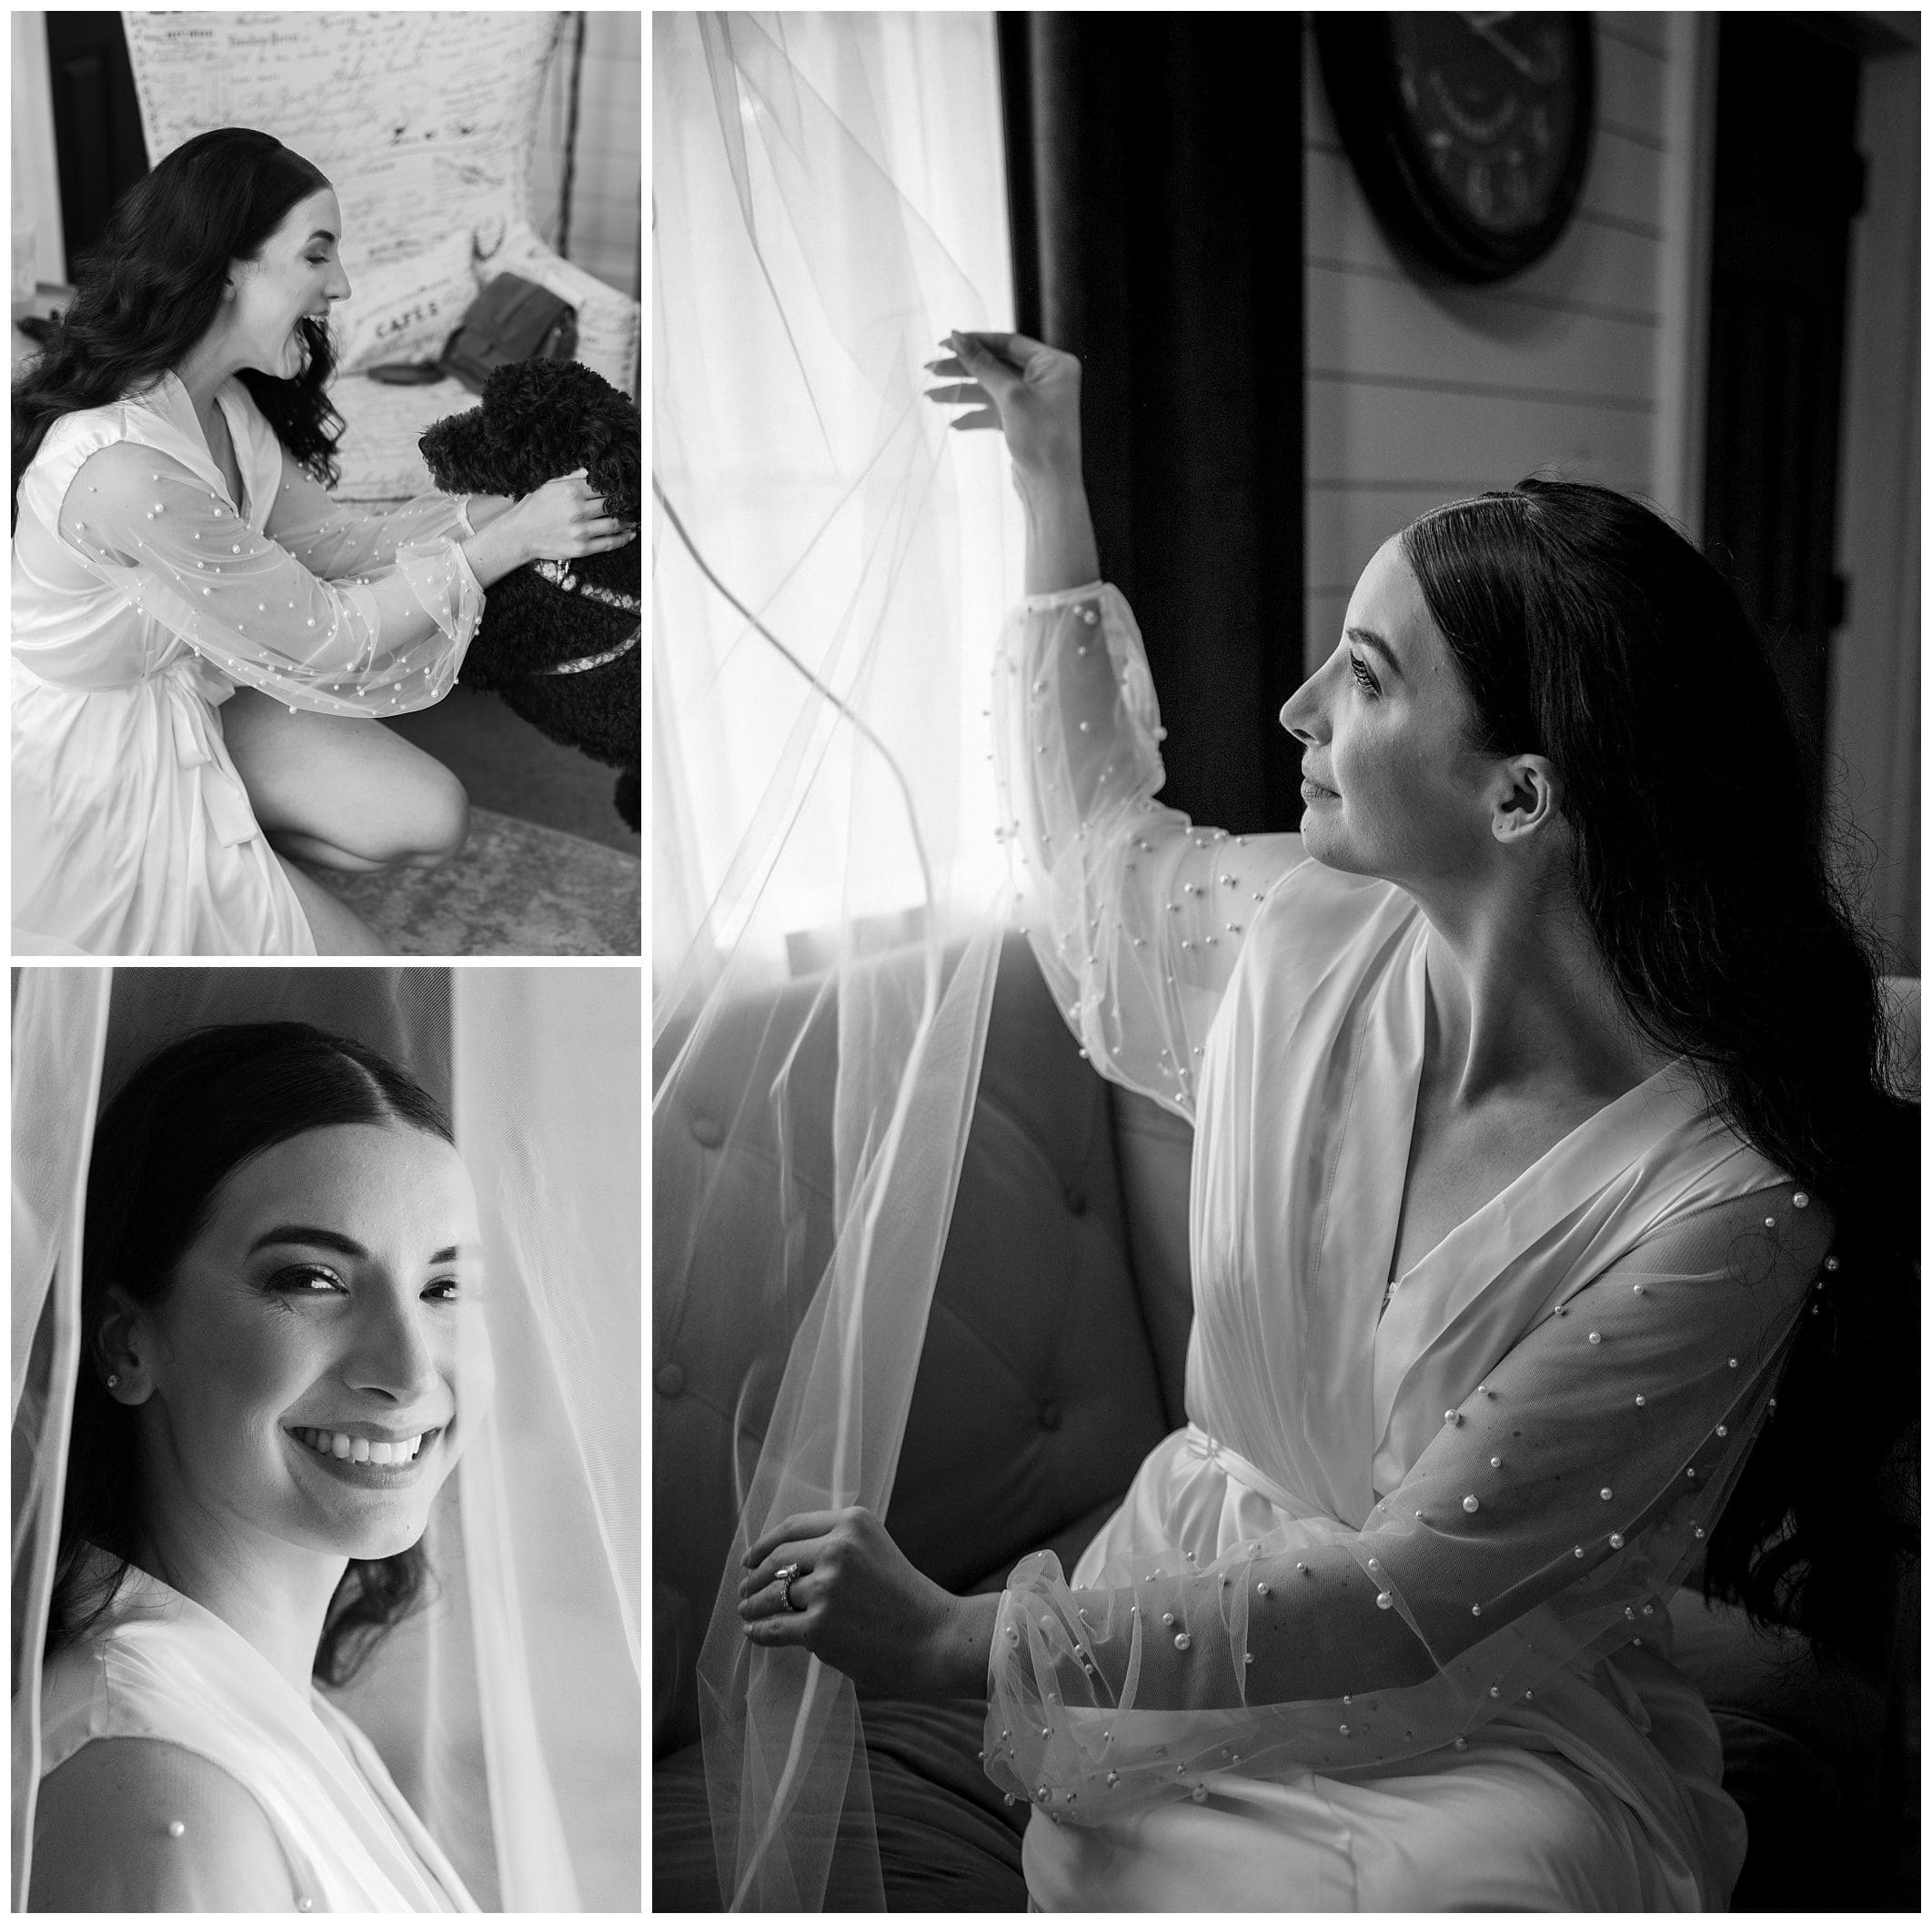 A collage of three black and white images of a bride in a robe, smiling and interacting with her veil in a well-lit room.